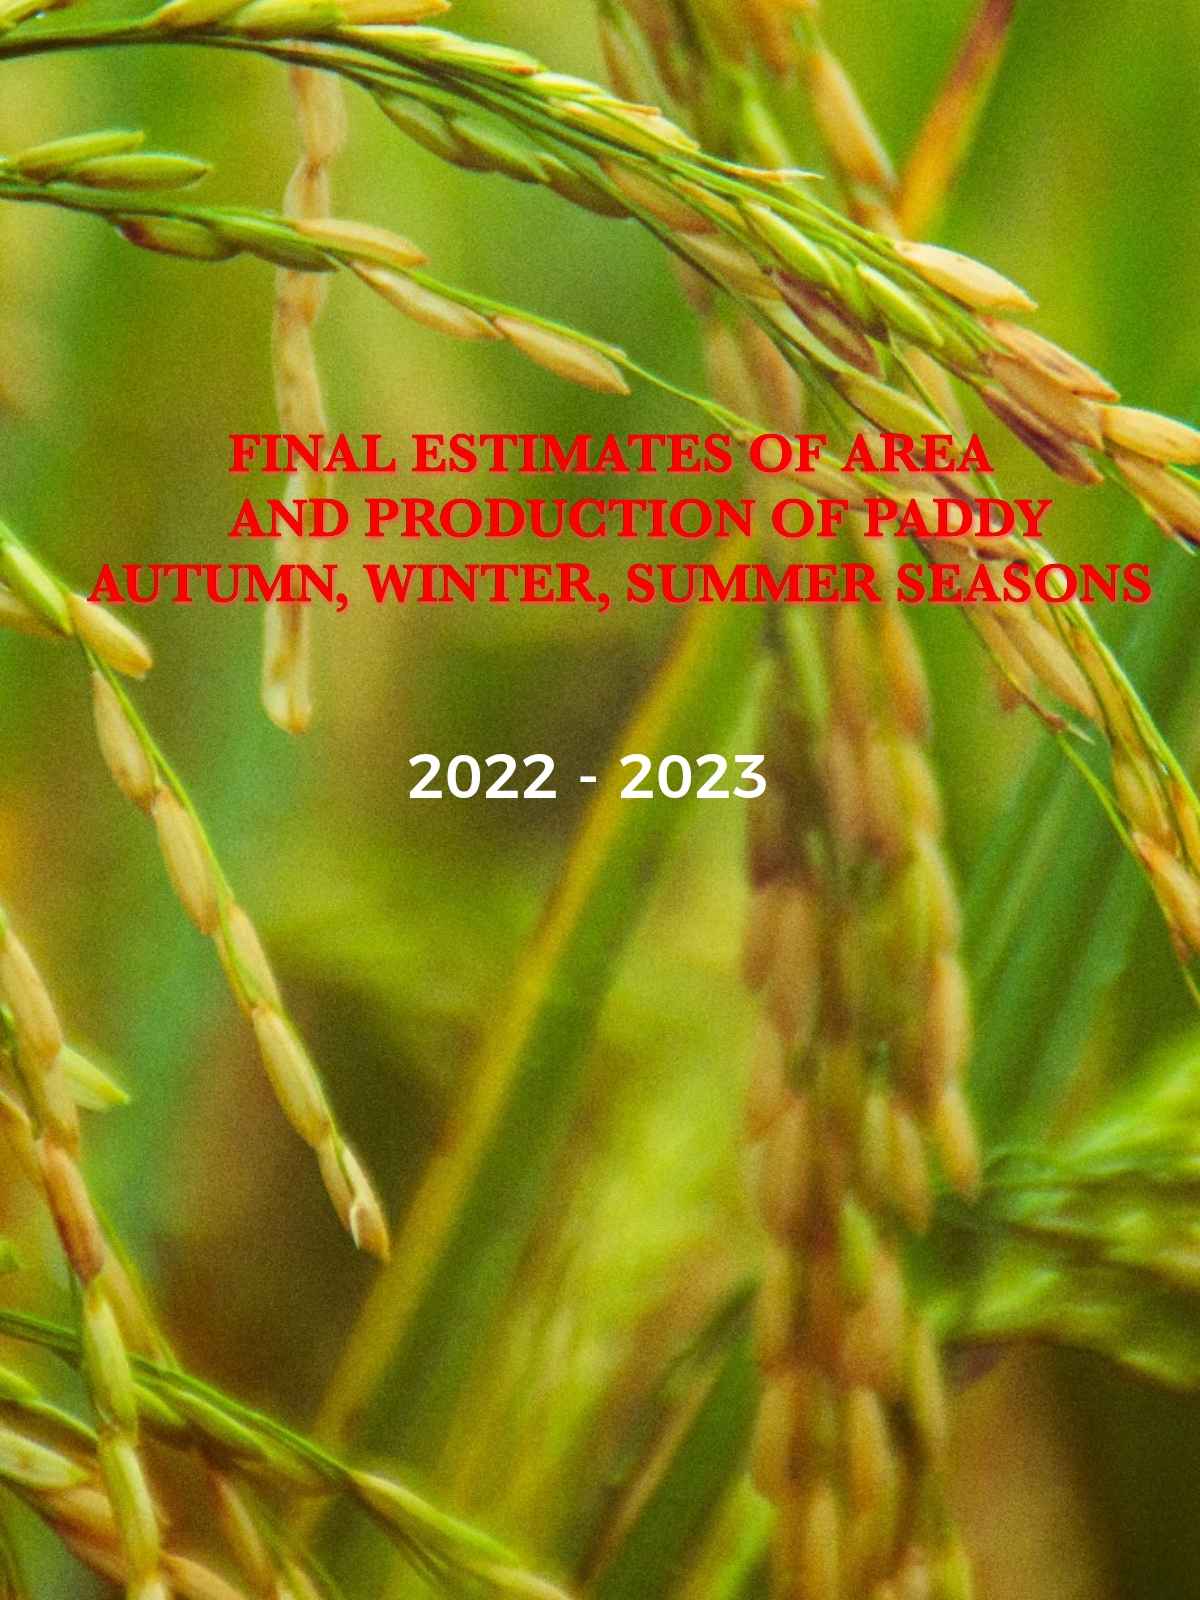 Final estimate of area and production of autumn, winter and summer paddy 2022-23